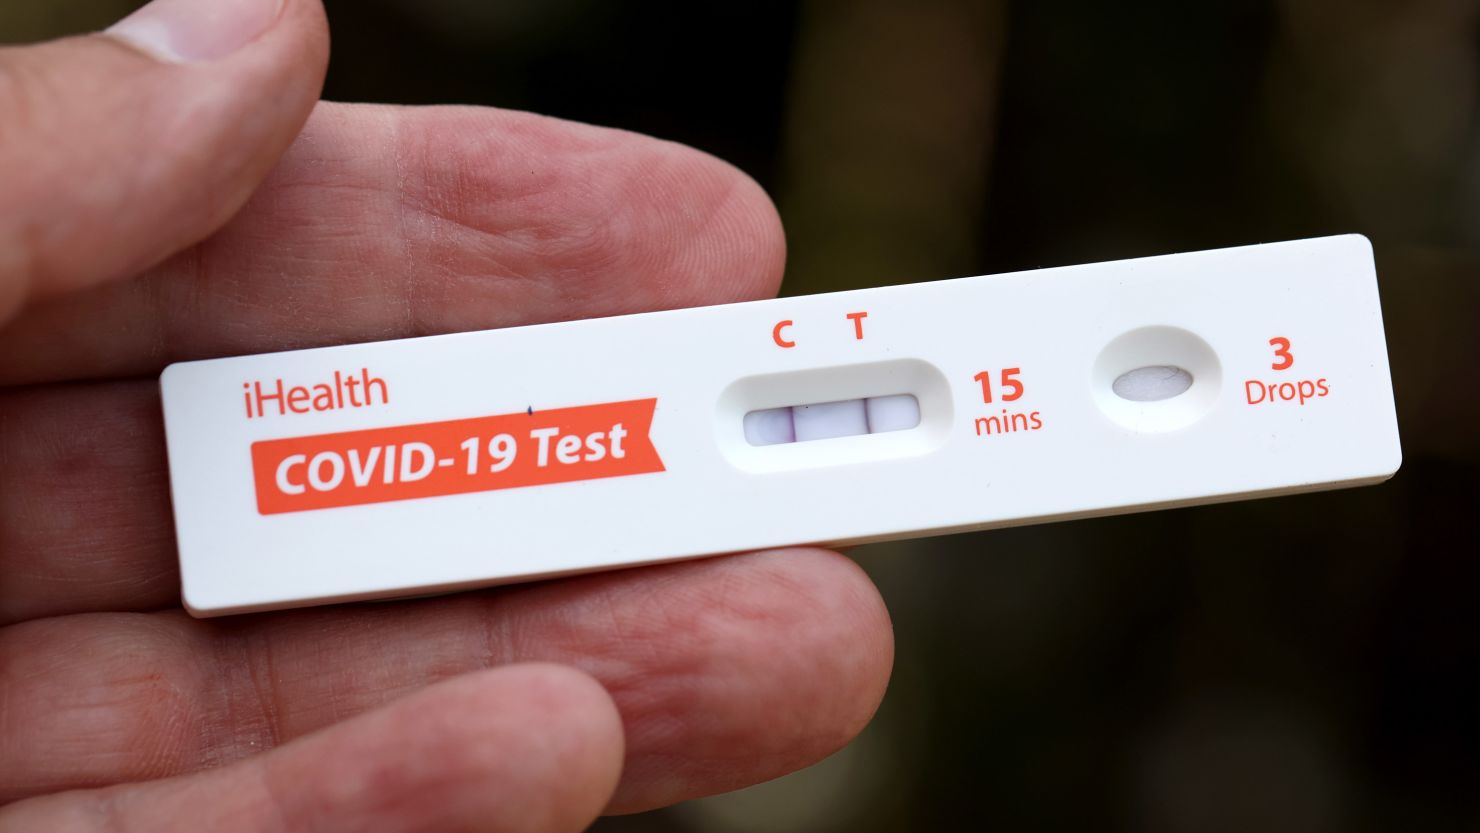 Demand for at-home Covid-19 tests is high, but don’t expect a shortage ...